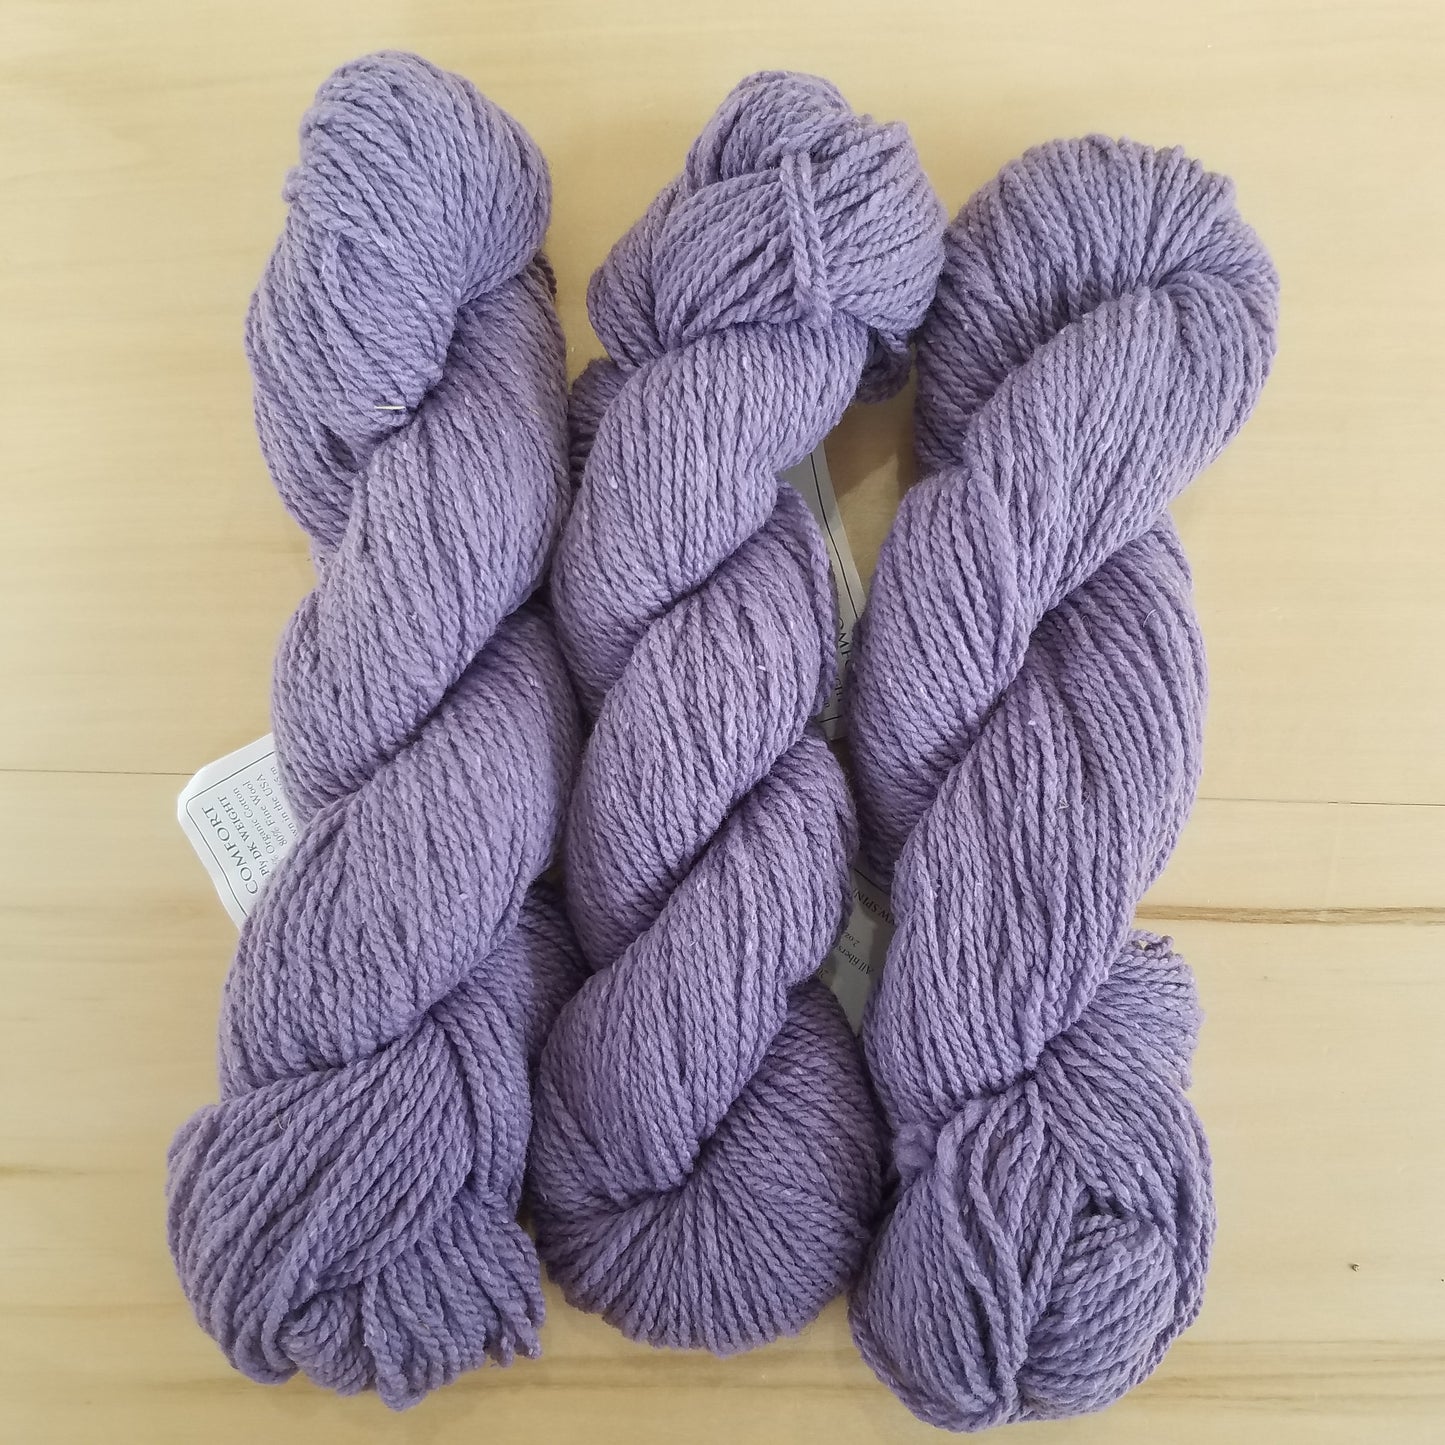 Cotton Comfort by Green Mountain Spinnery: Violet - Maine Yarn & Fiber Supply